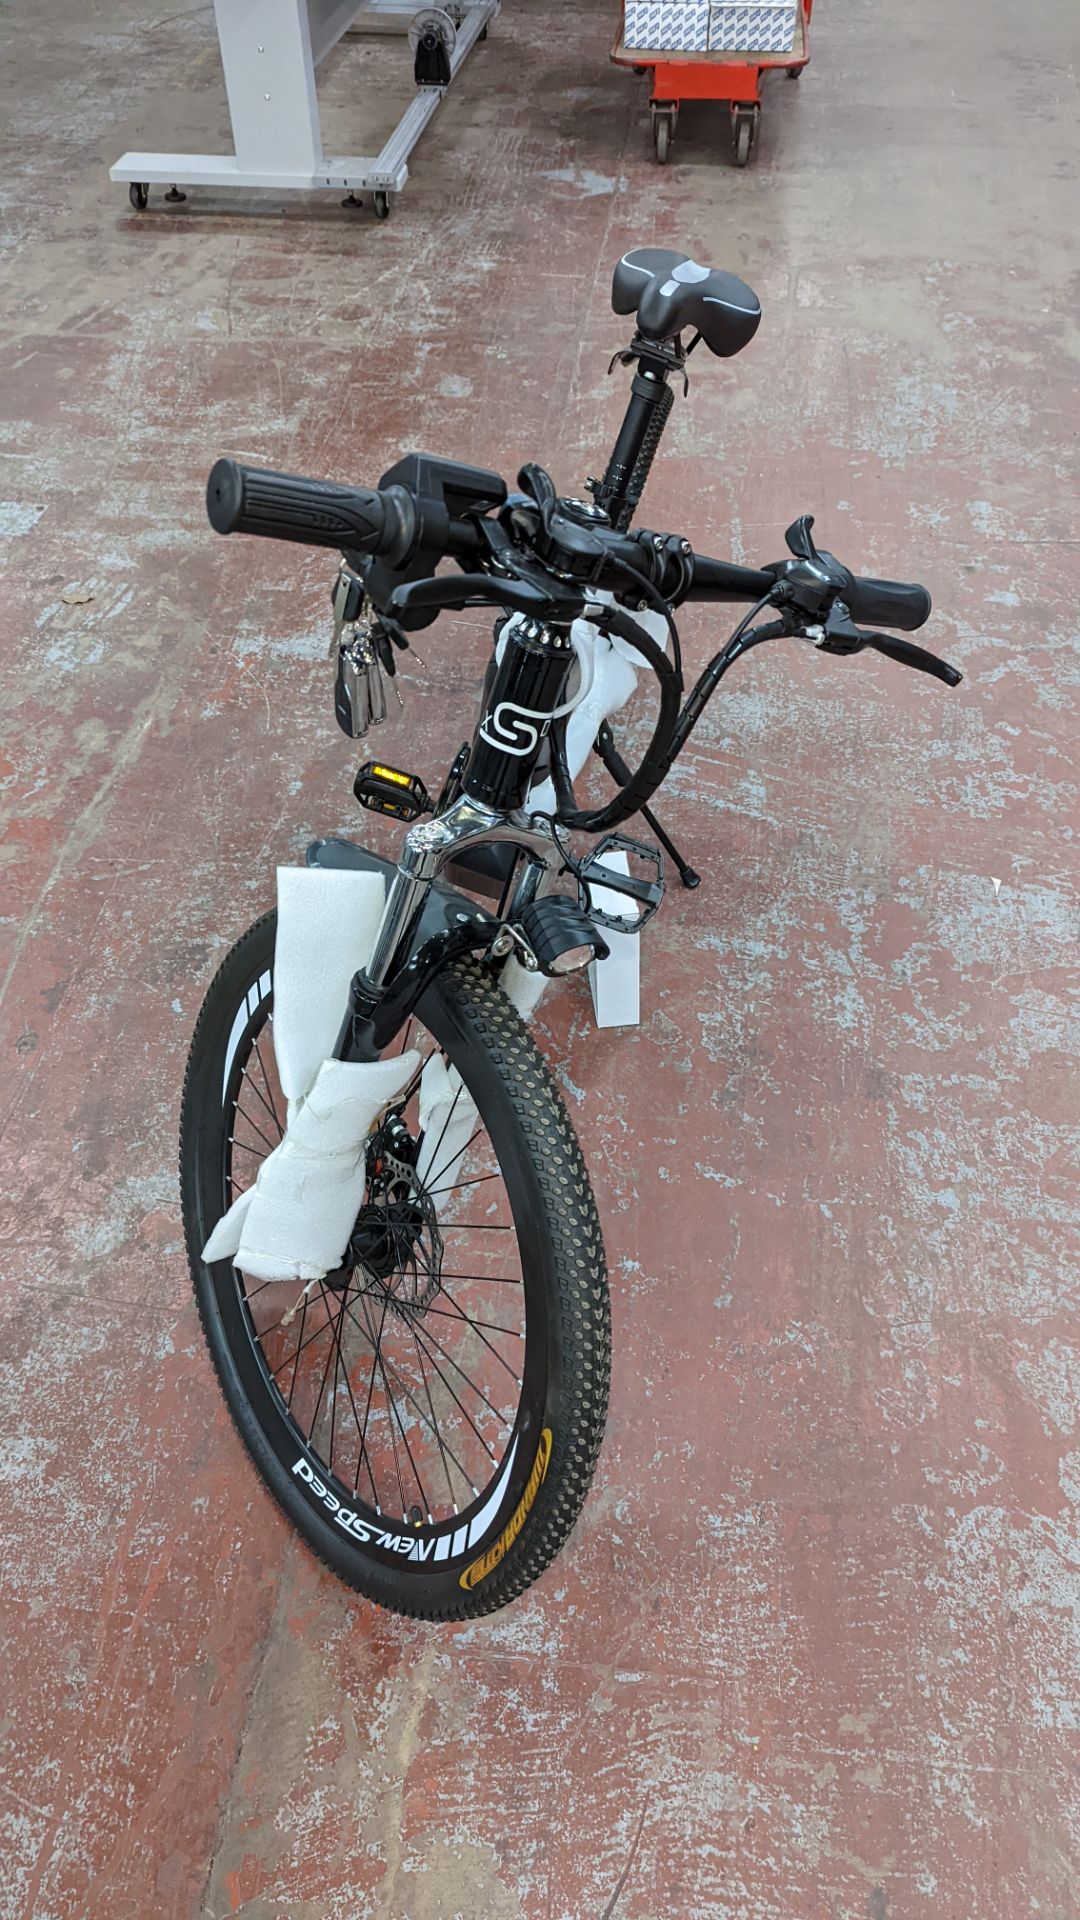 XSD FTX Sport MTB 7.5 Racing electric bike with Shimano Tourney TZ gears. Includes 36v 12AH battery, - Image 6 of 19